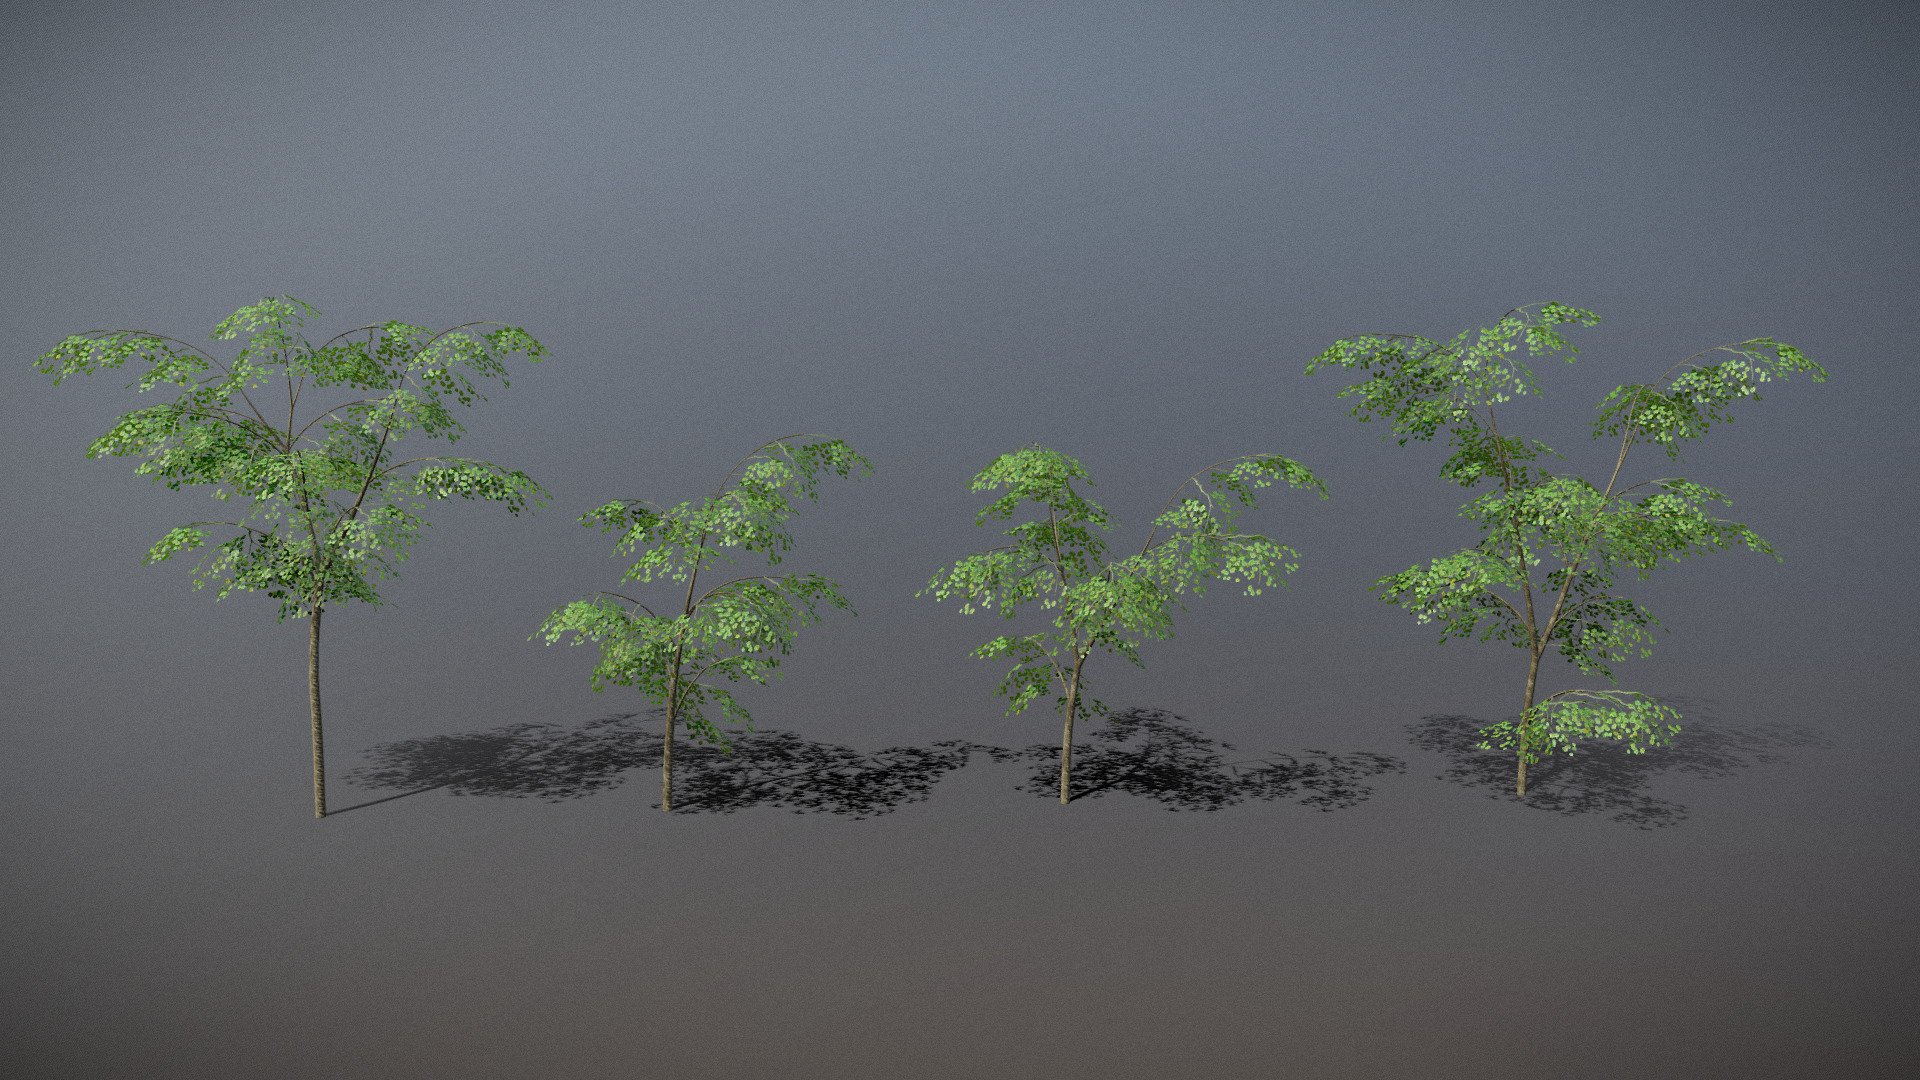 Four low poly maple tree variations. 

Texturing

Foliage - 4k textures with color, opacity, and normal maps

Bark - High quality texture containing color, normal, and roughness maps




The models range around 2.5k - 4k tris each, and are fully UV mapped.

The additional file contains each tree in a seperate FBX file (textures not embedded), and the .obj format 3d model